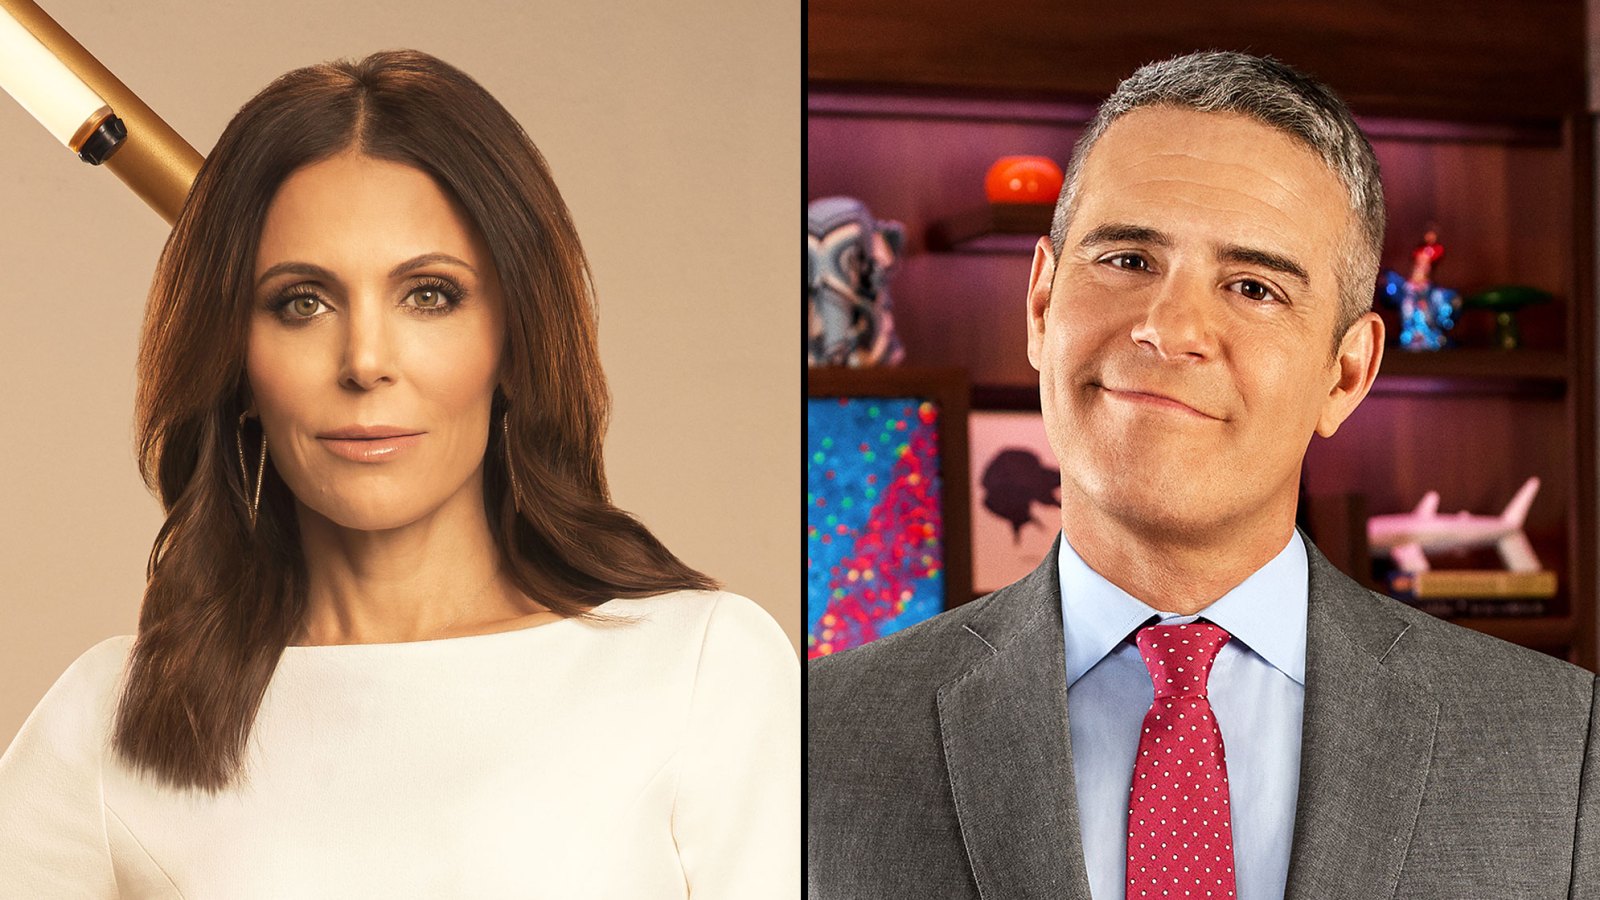 Bethenny Frankel Explains Why Andy Cohen Didn't Want Her on RHONY